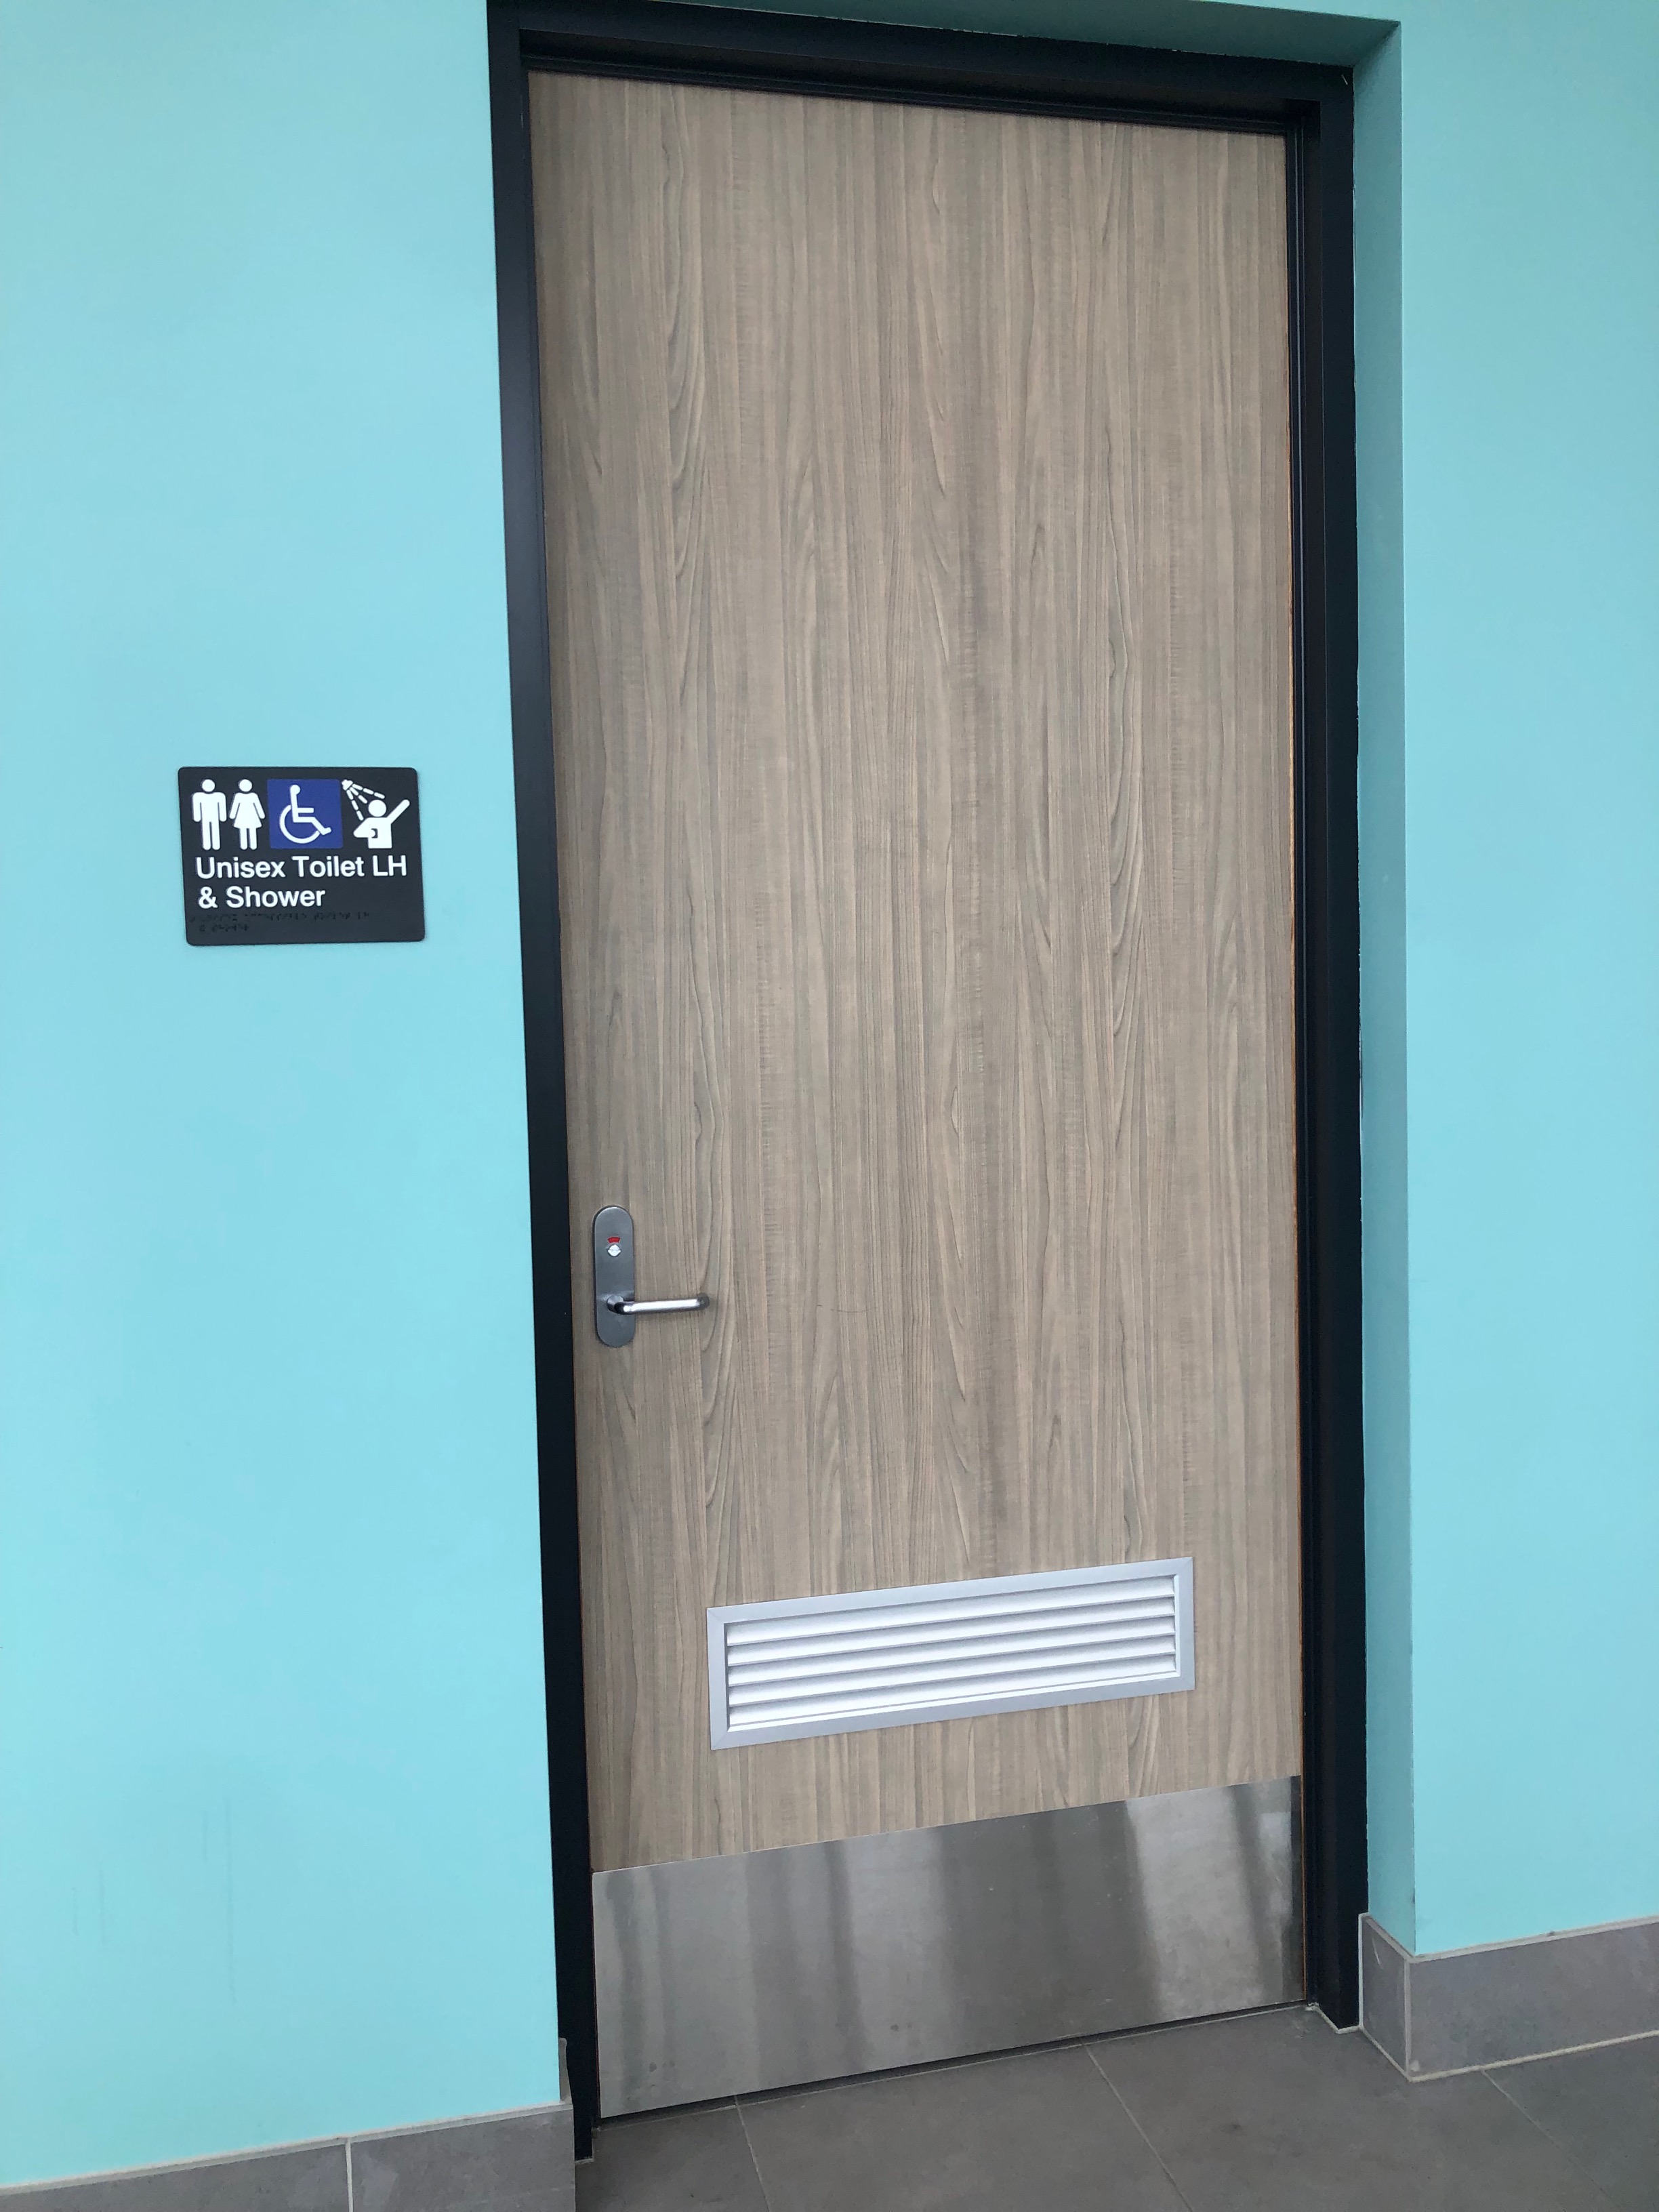 Accessible, unisex toilet, shower and changeroom located next to the entrance foyer